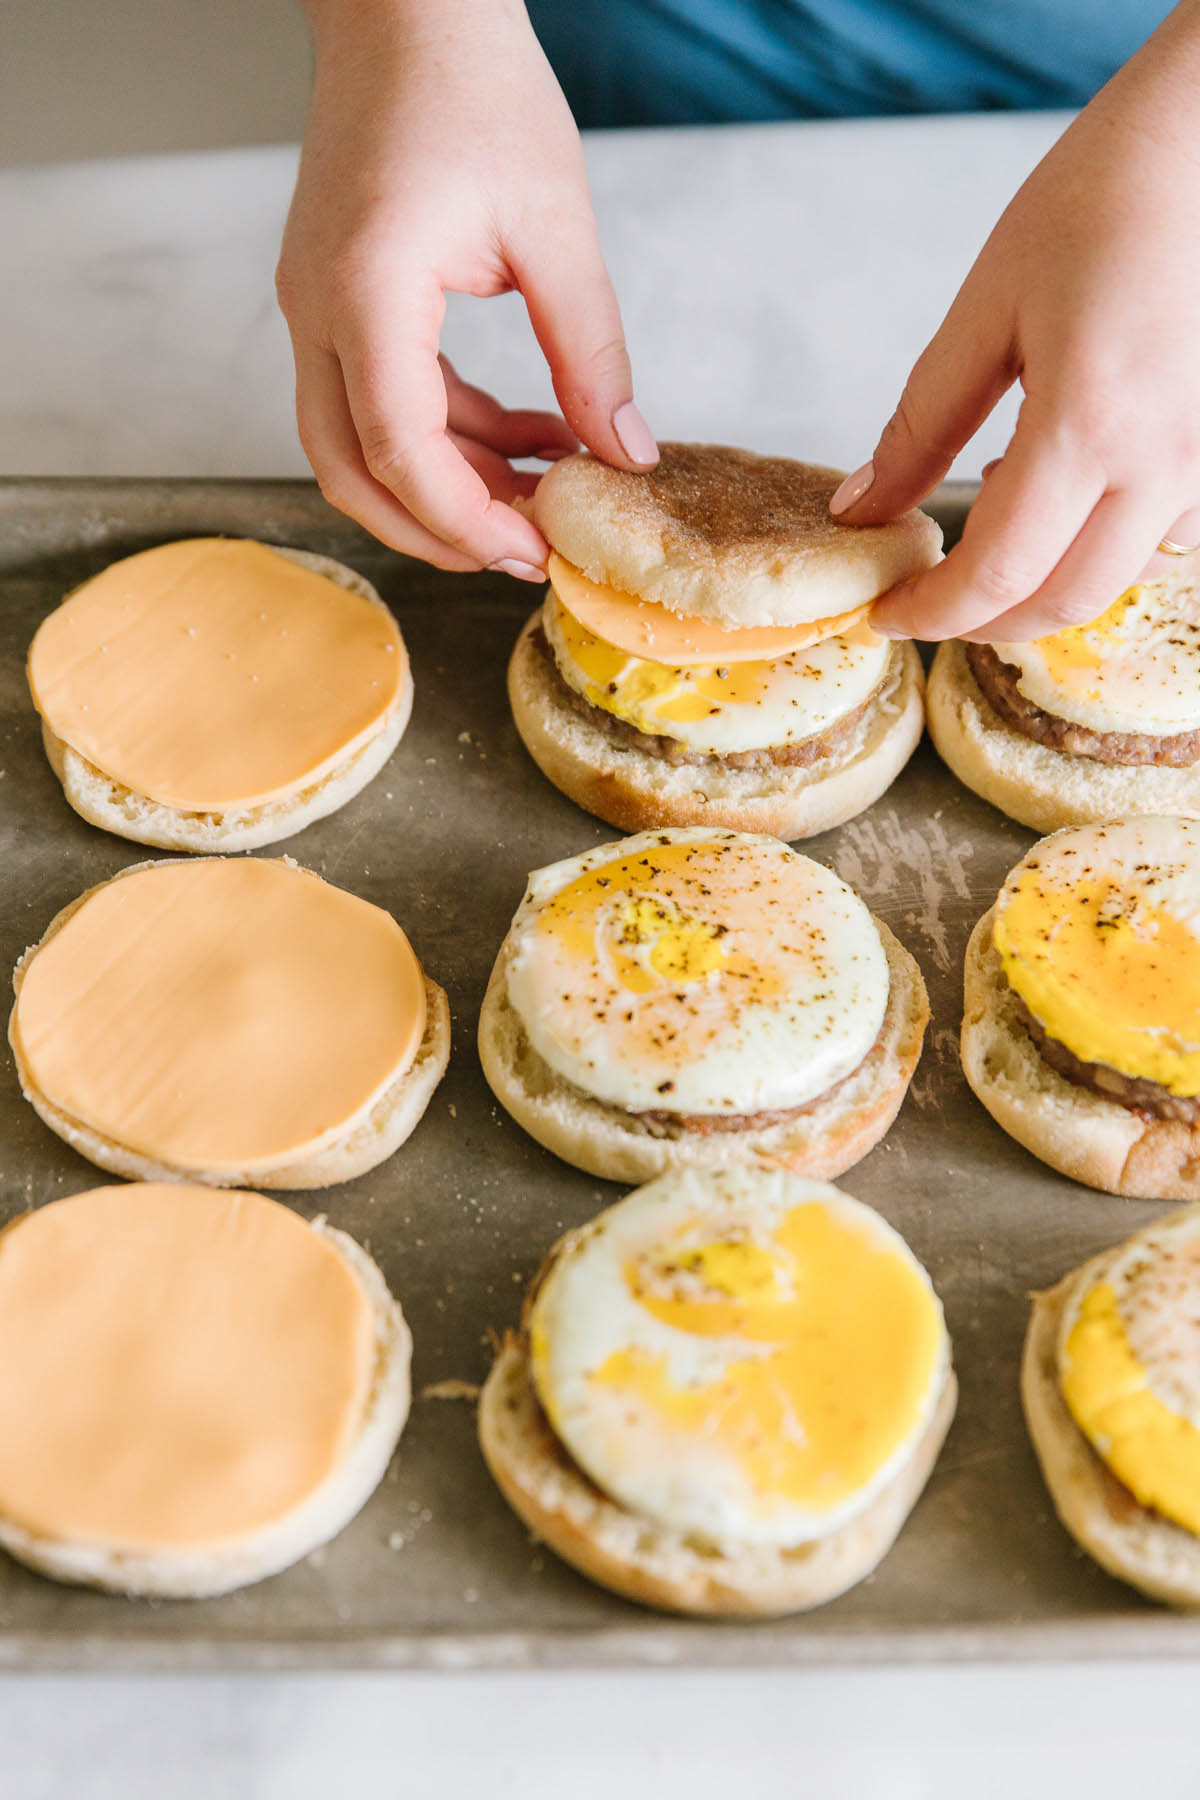 A pan with English muffins, cheese, eggs and sausage on them with two hands adding a top English muffin to one sandwich.